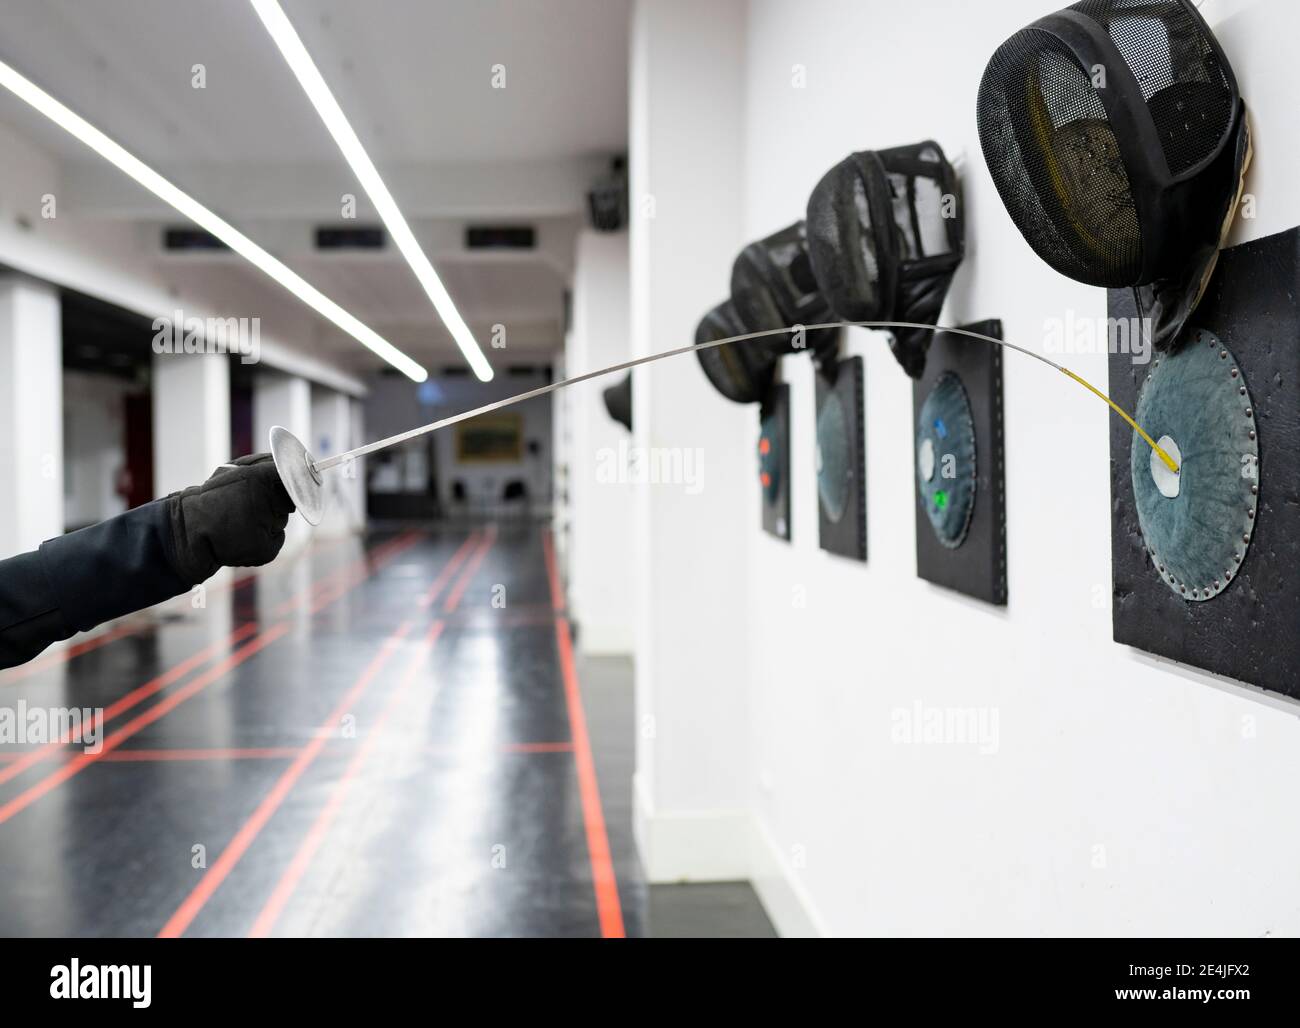 Woman's hand with fencing sword hitting target at gym Stock Photo